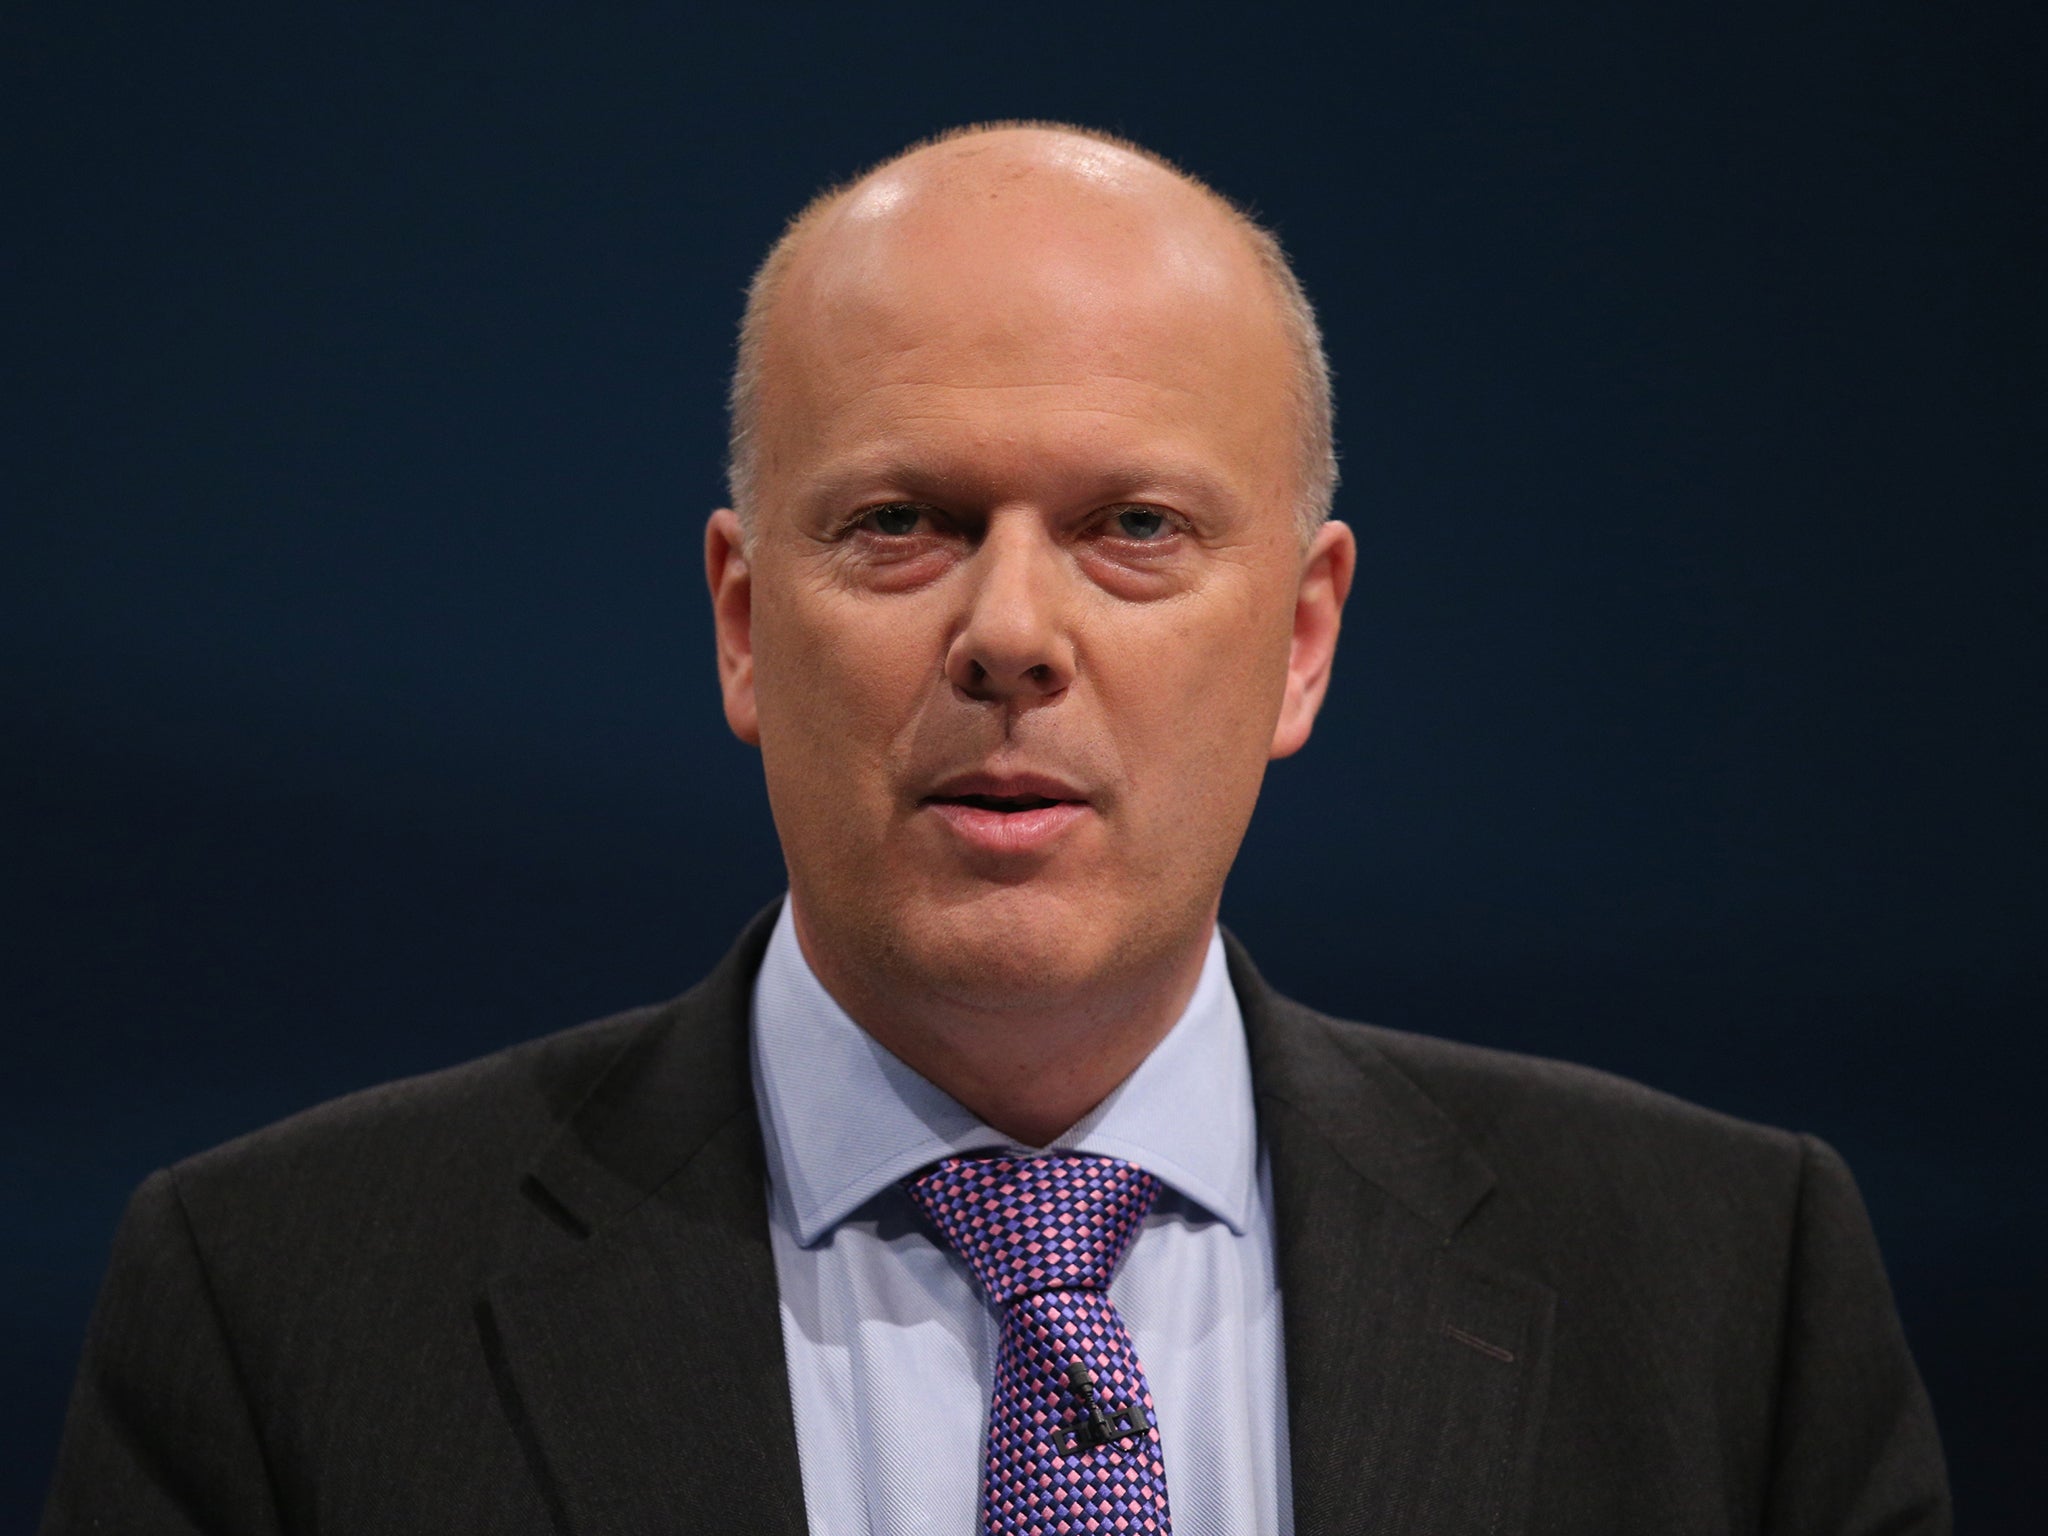 Chris Grayling has been urged to clarify his response to prison report